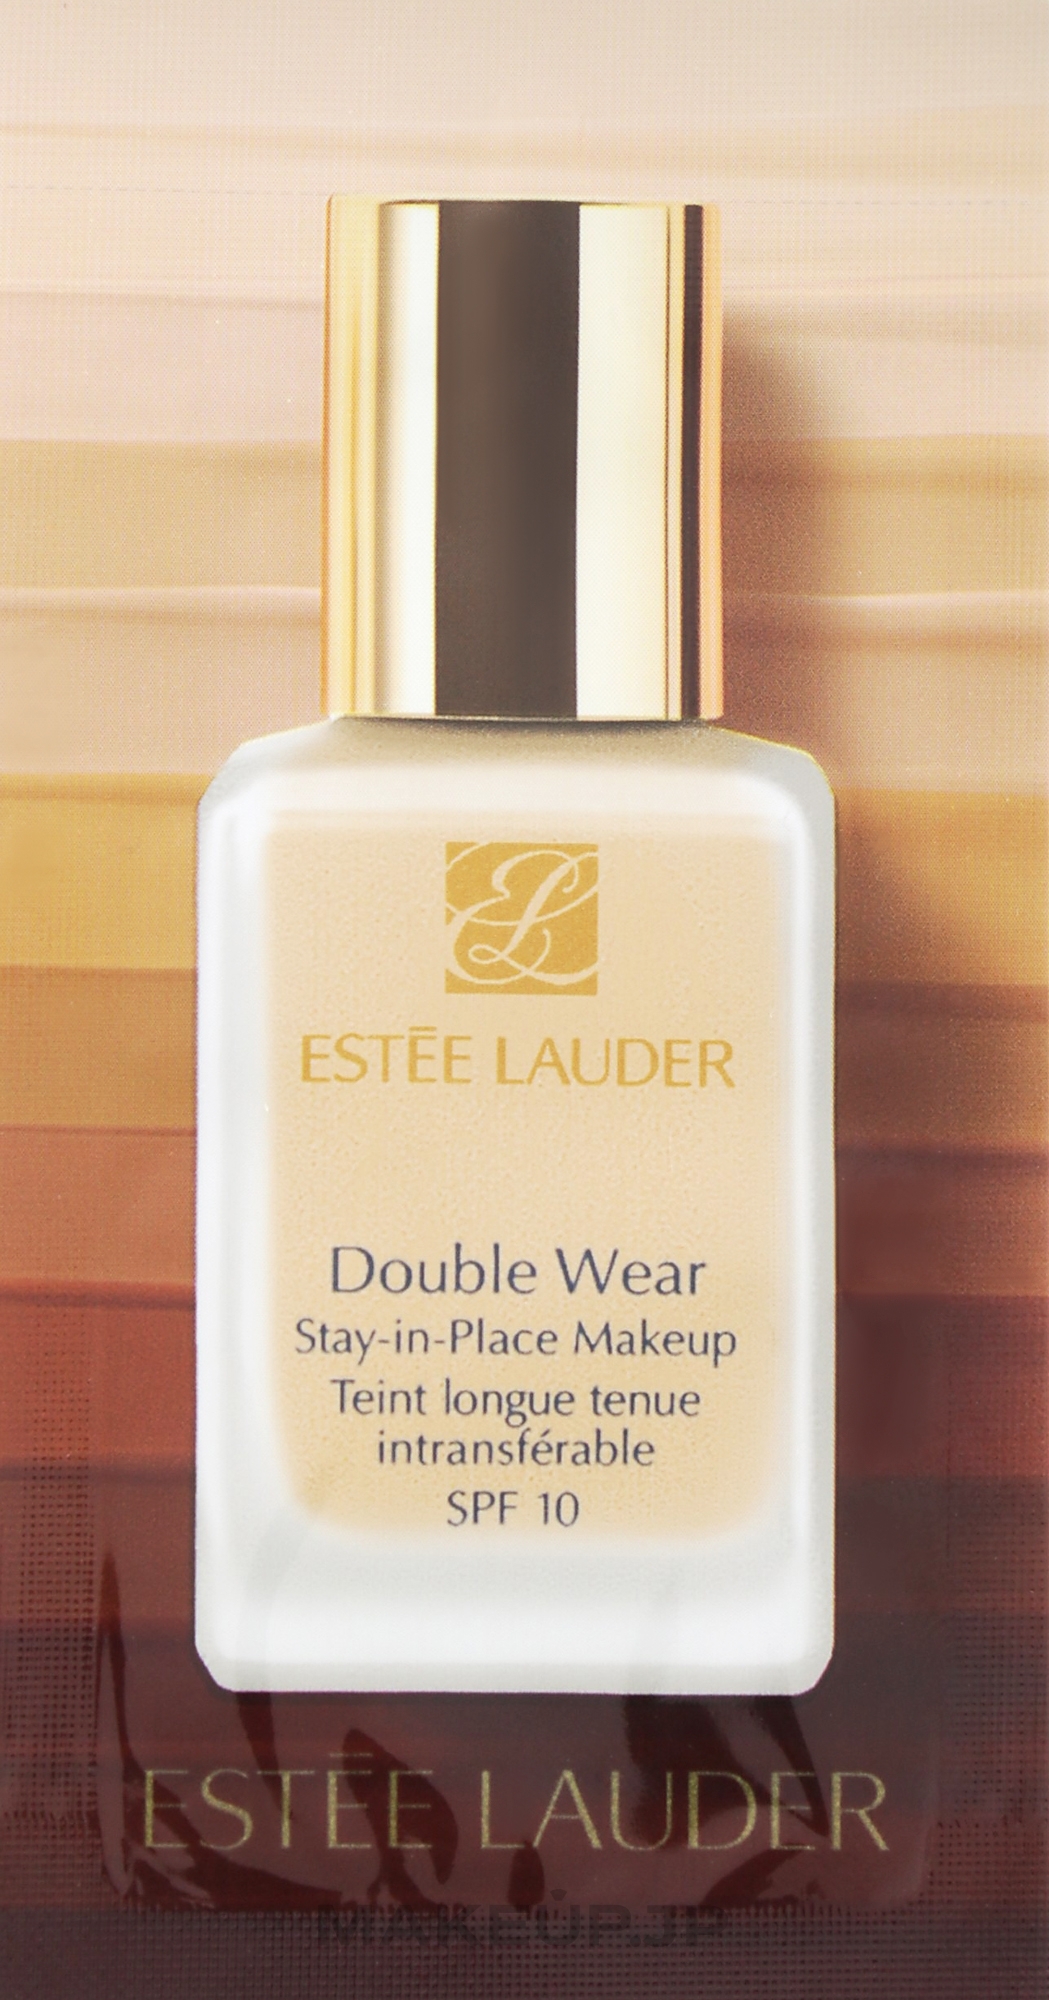 GIFT Foundation Cream - Estee Lauder Double Wear Stay-in-Place Makeup SPF10 (sample) — photo 2N1 - Desert Beige